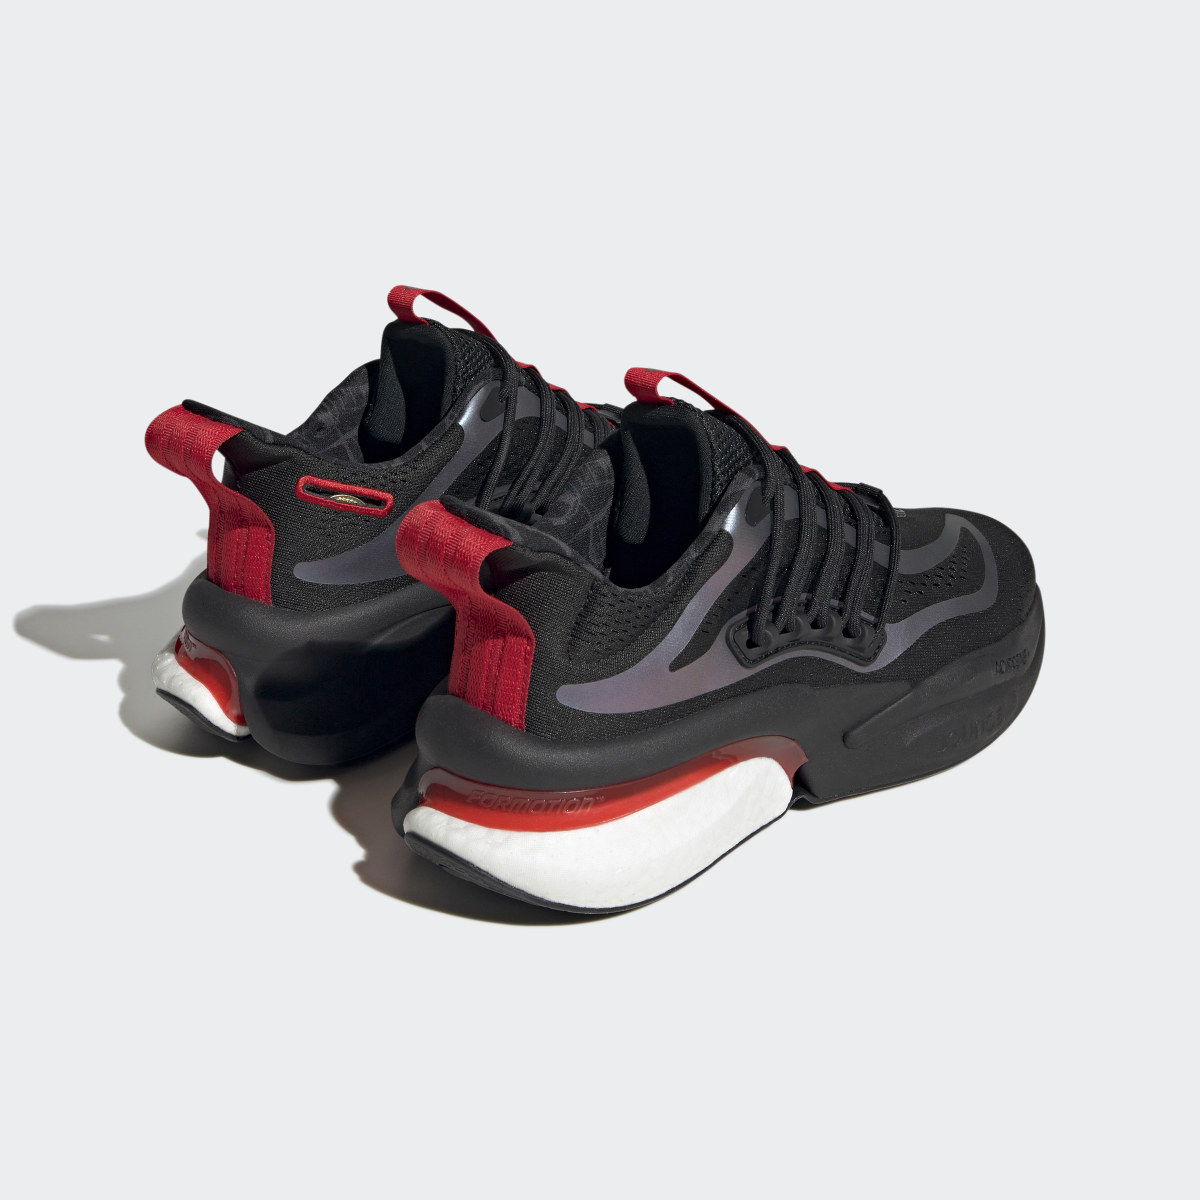 Adidas Planet Z Alphaboost V1 Shoes. 6